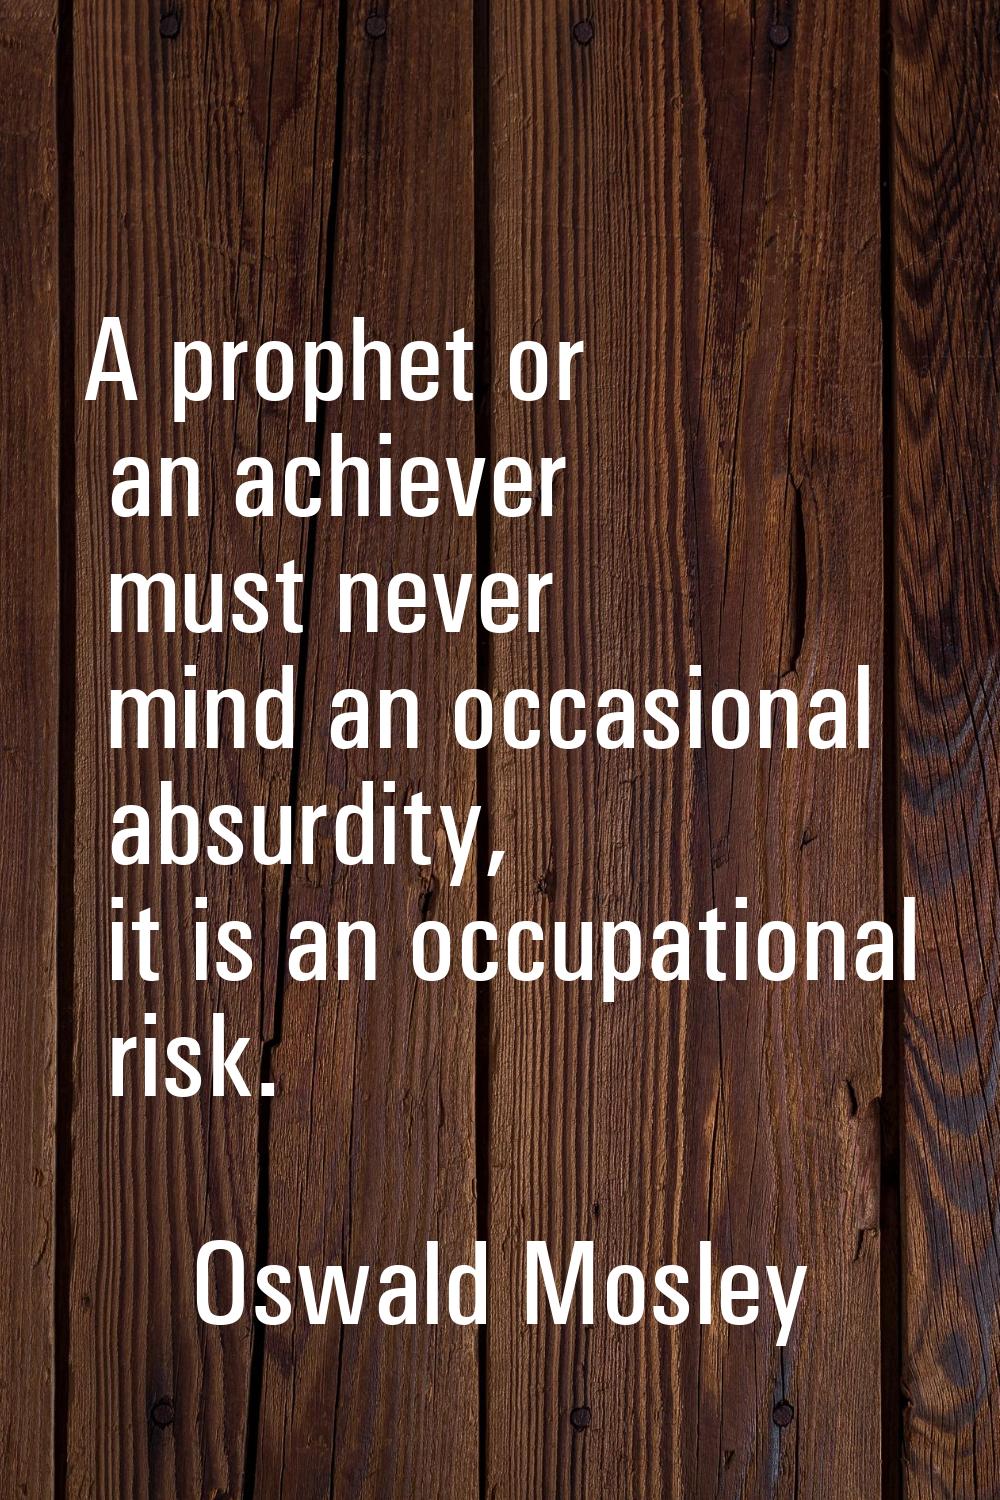 A prophet or an achiever must never mind an occasional absurdity, it is an occupational risk.